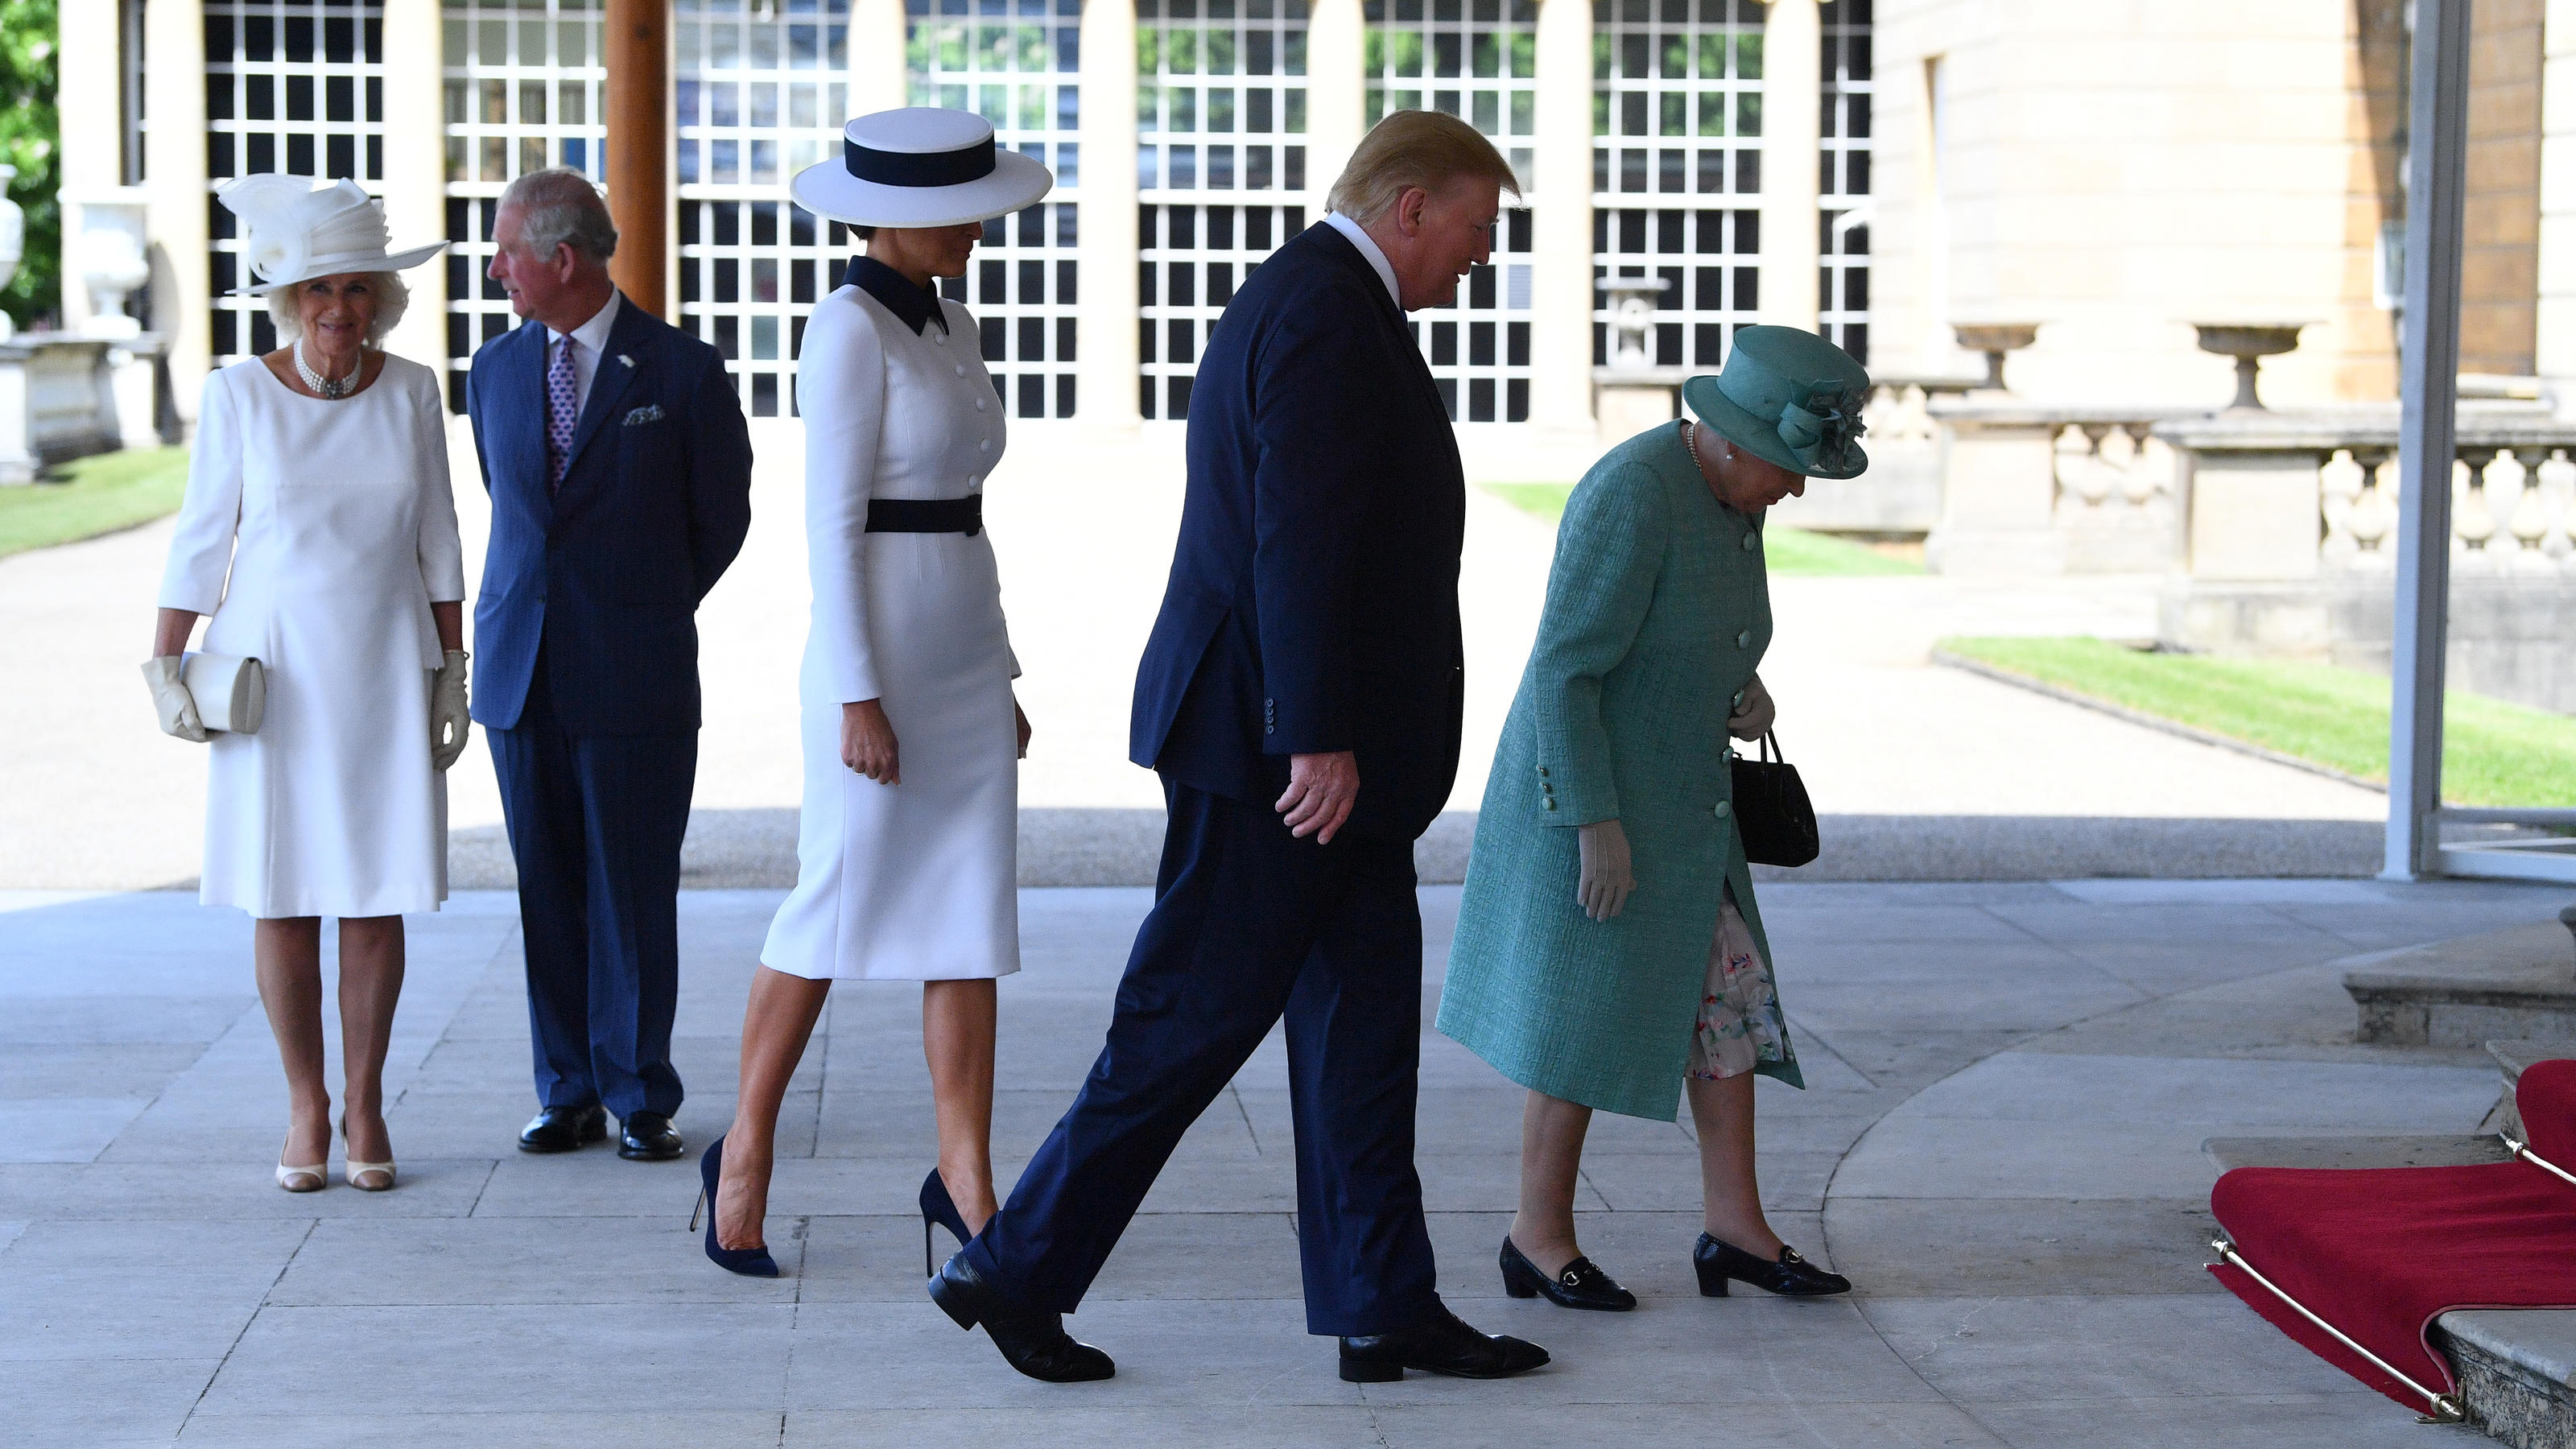 Britain's Camilla, Duchess of Cornwall, Prince Charles, U.S. first lady Melania Trump, U.S. President Donald Trump and Queen Elizabeth II arrive for the Ceremonial Welcome at Buckingham Palace in London, Britain June 3, 2019. Victoria Jones/Pool via 